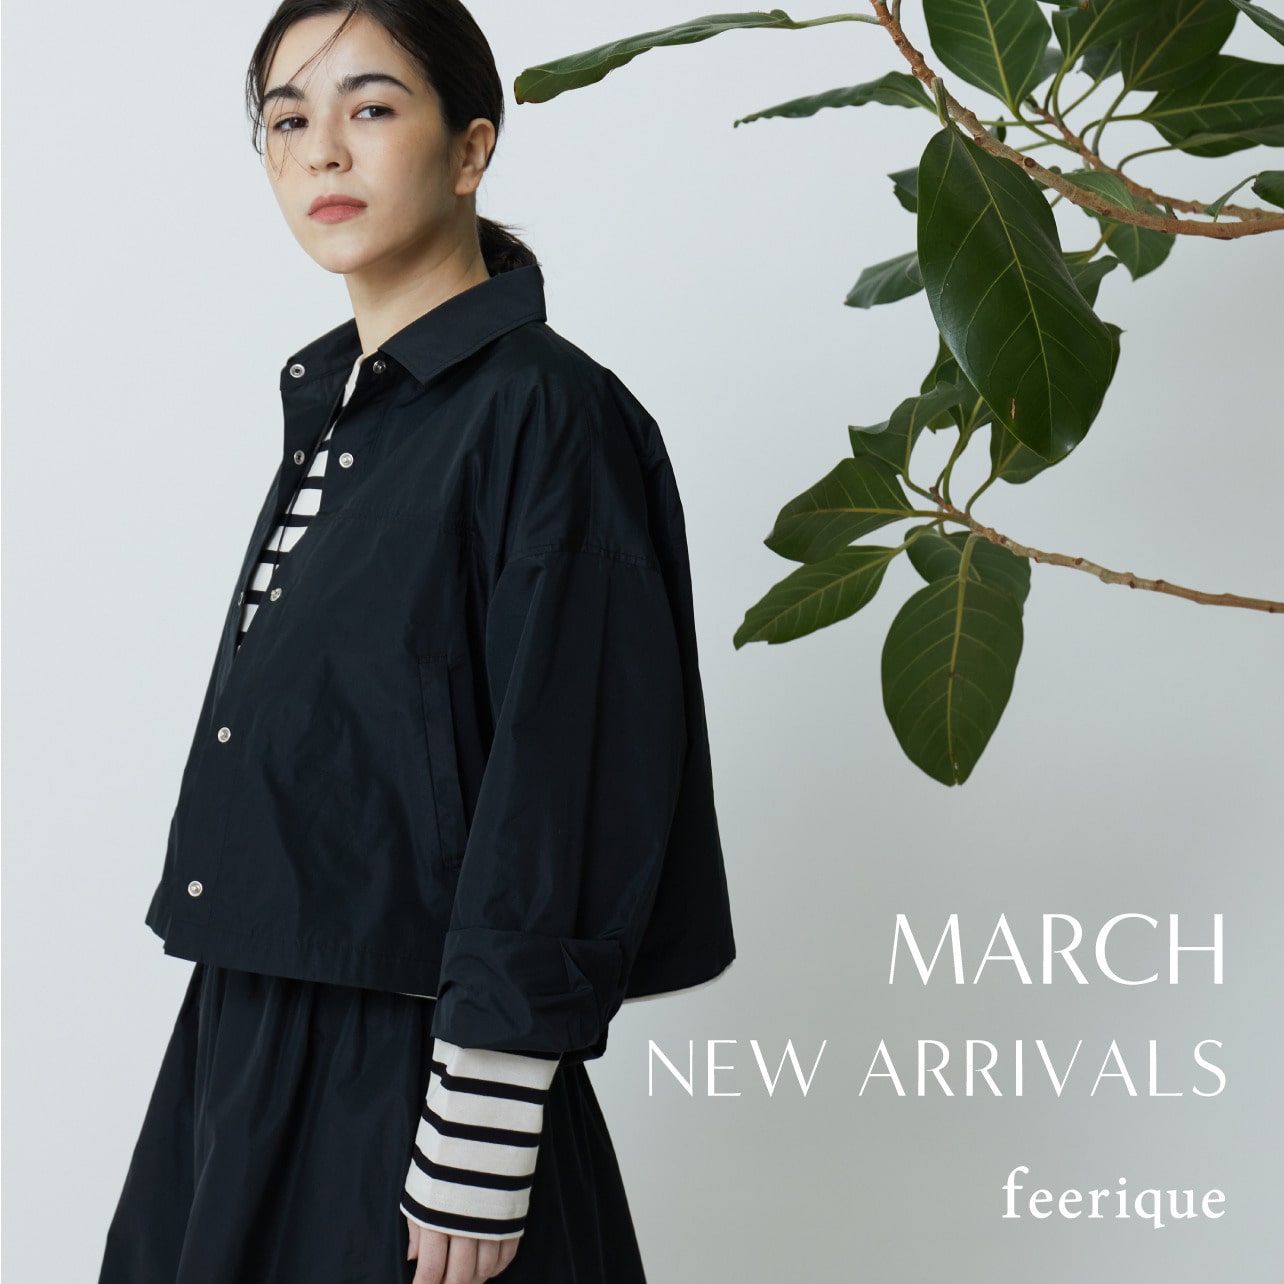 feerique 23 March New Arrivals